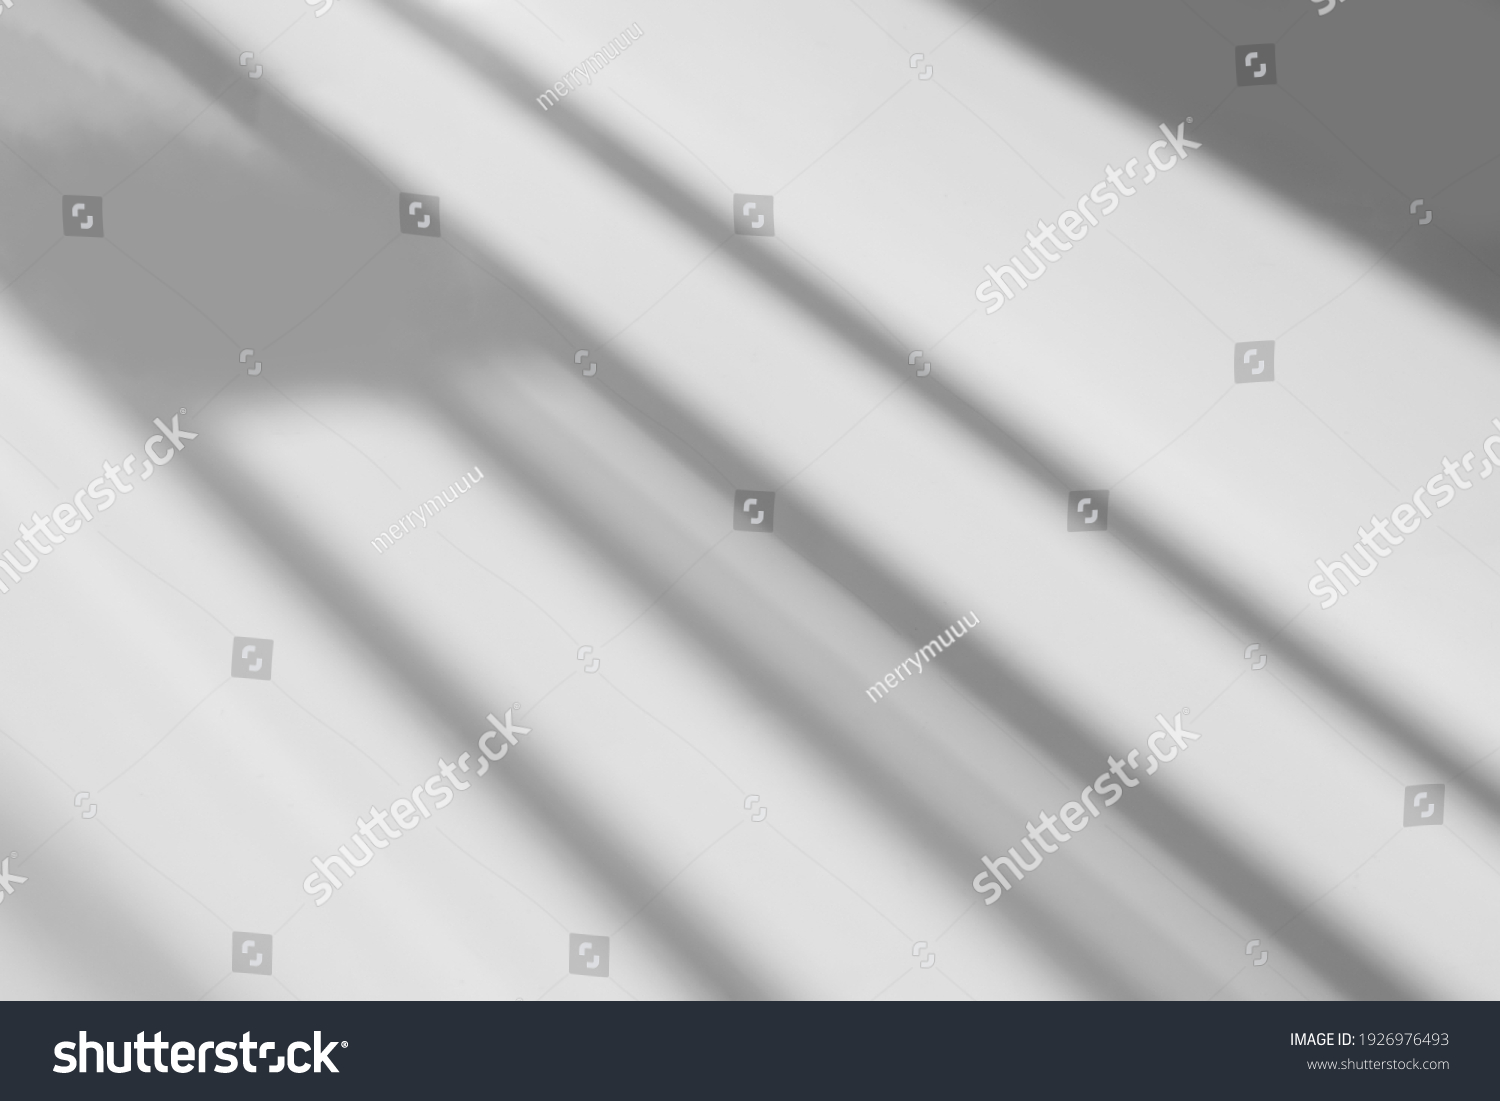 Abstract shadow and striped diagonal light blur background on white wall  from window,  architecture dark gray and sunshine diagonal geometric effect overlay for backdrop and mockup design
 #1926976493